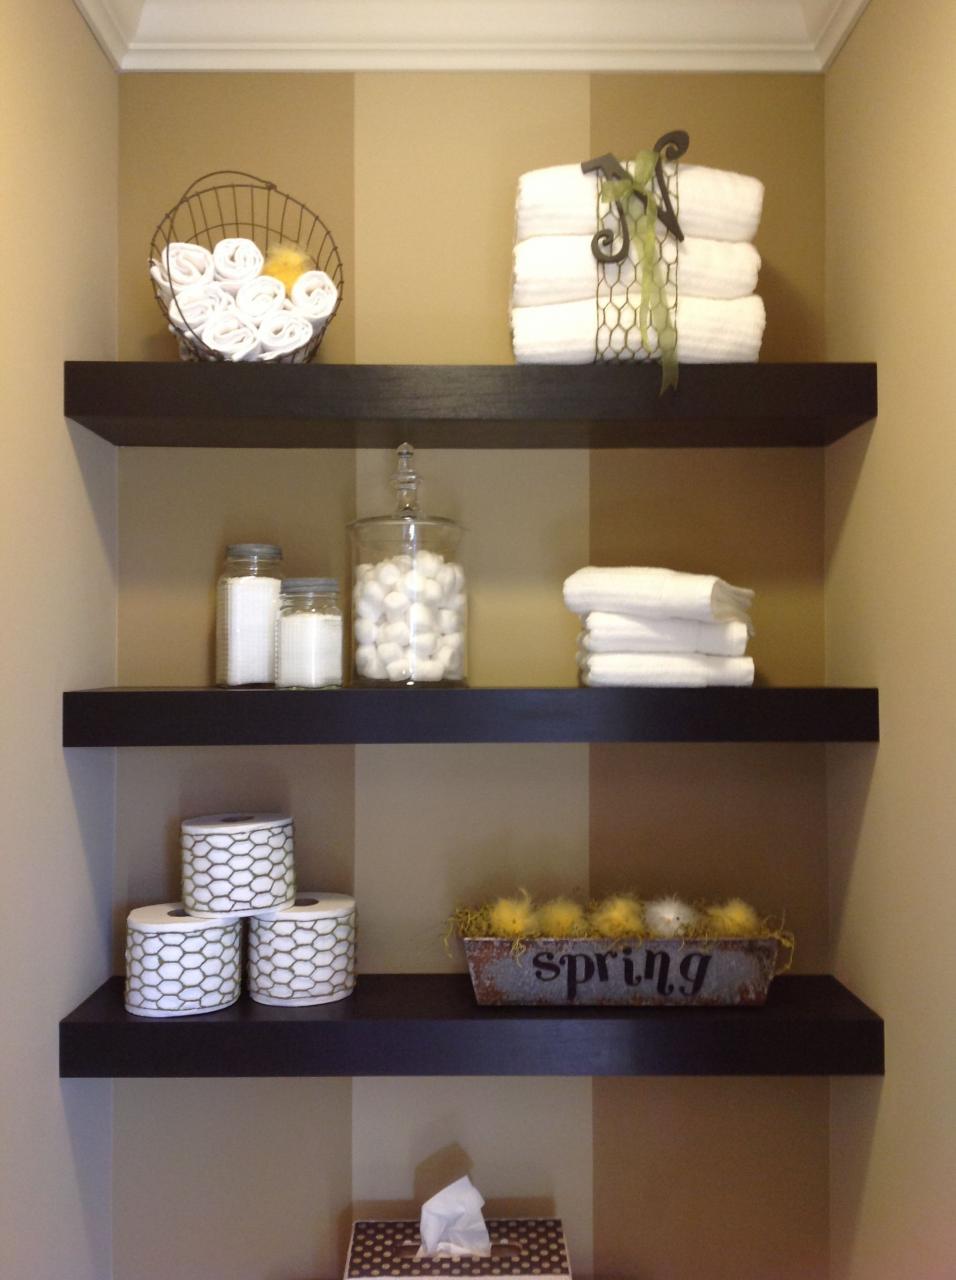 bathroom shelves with towels and baskets on them